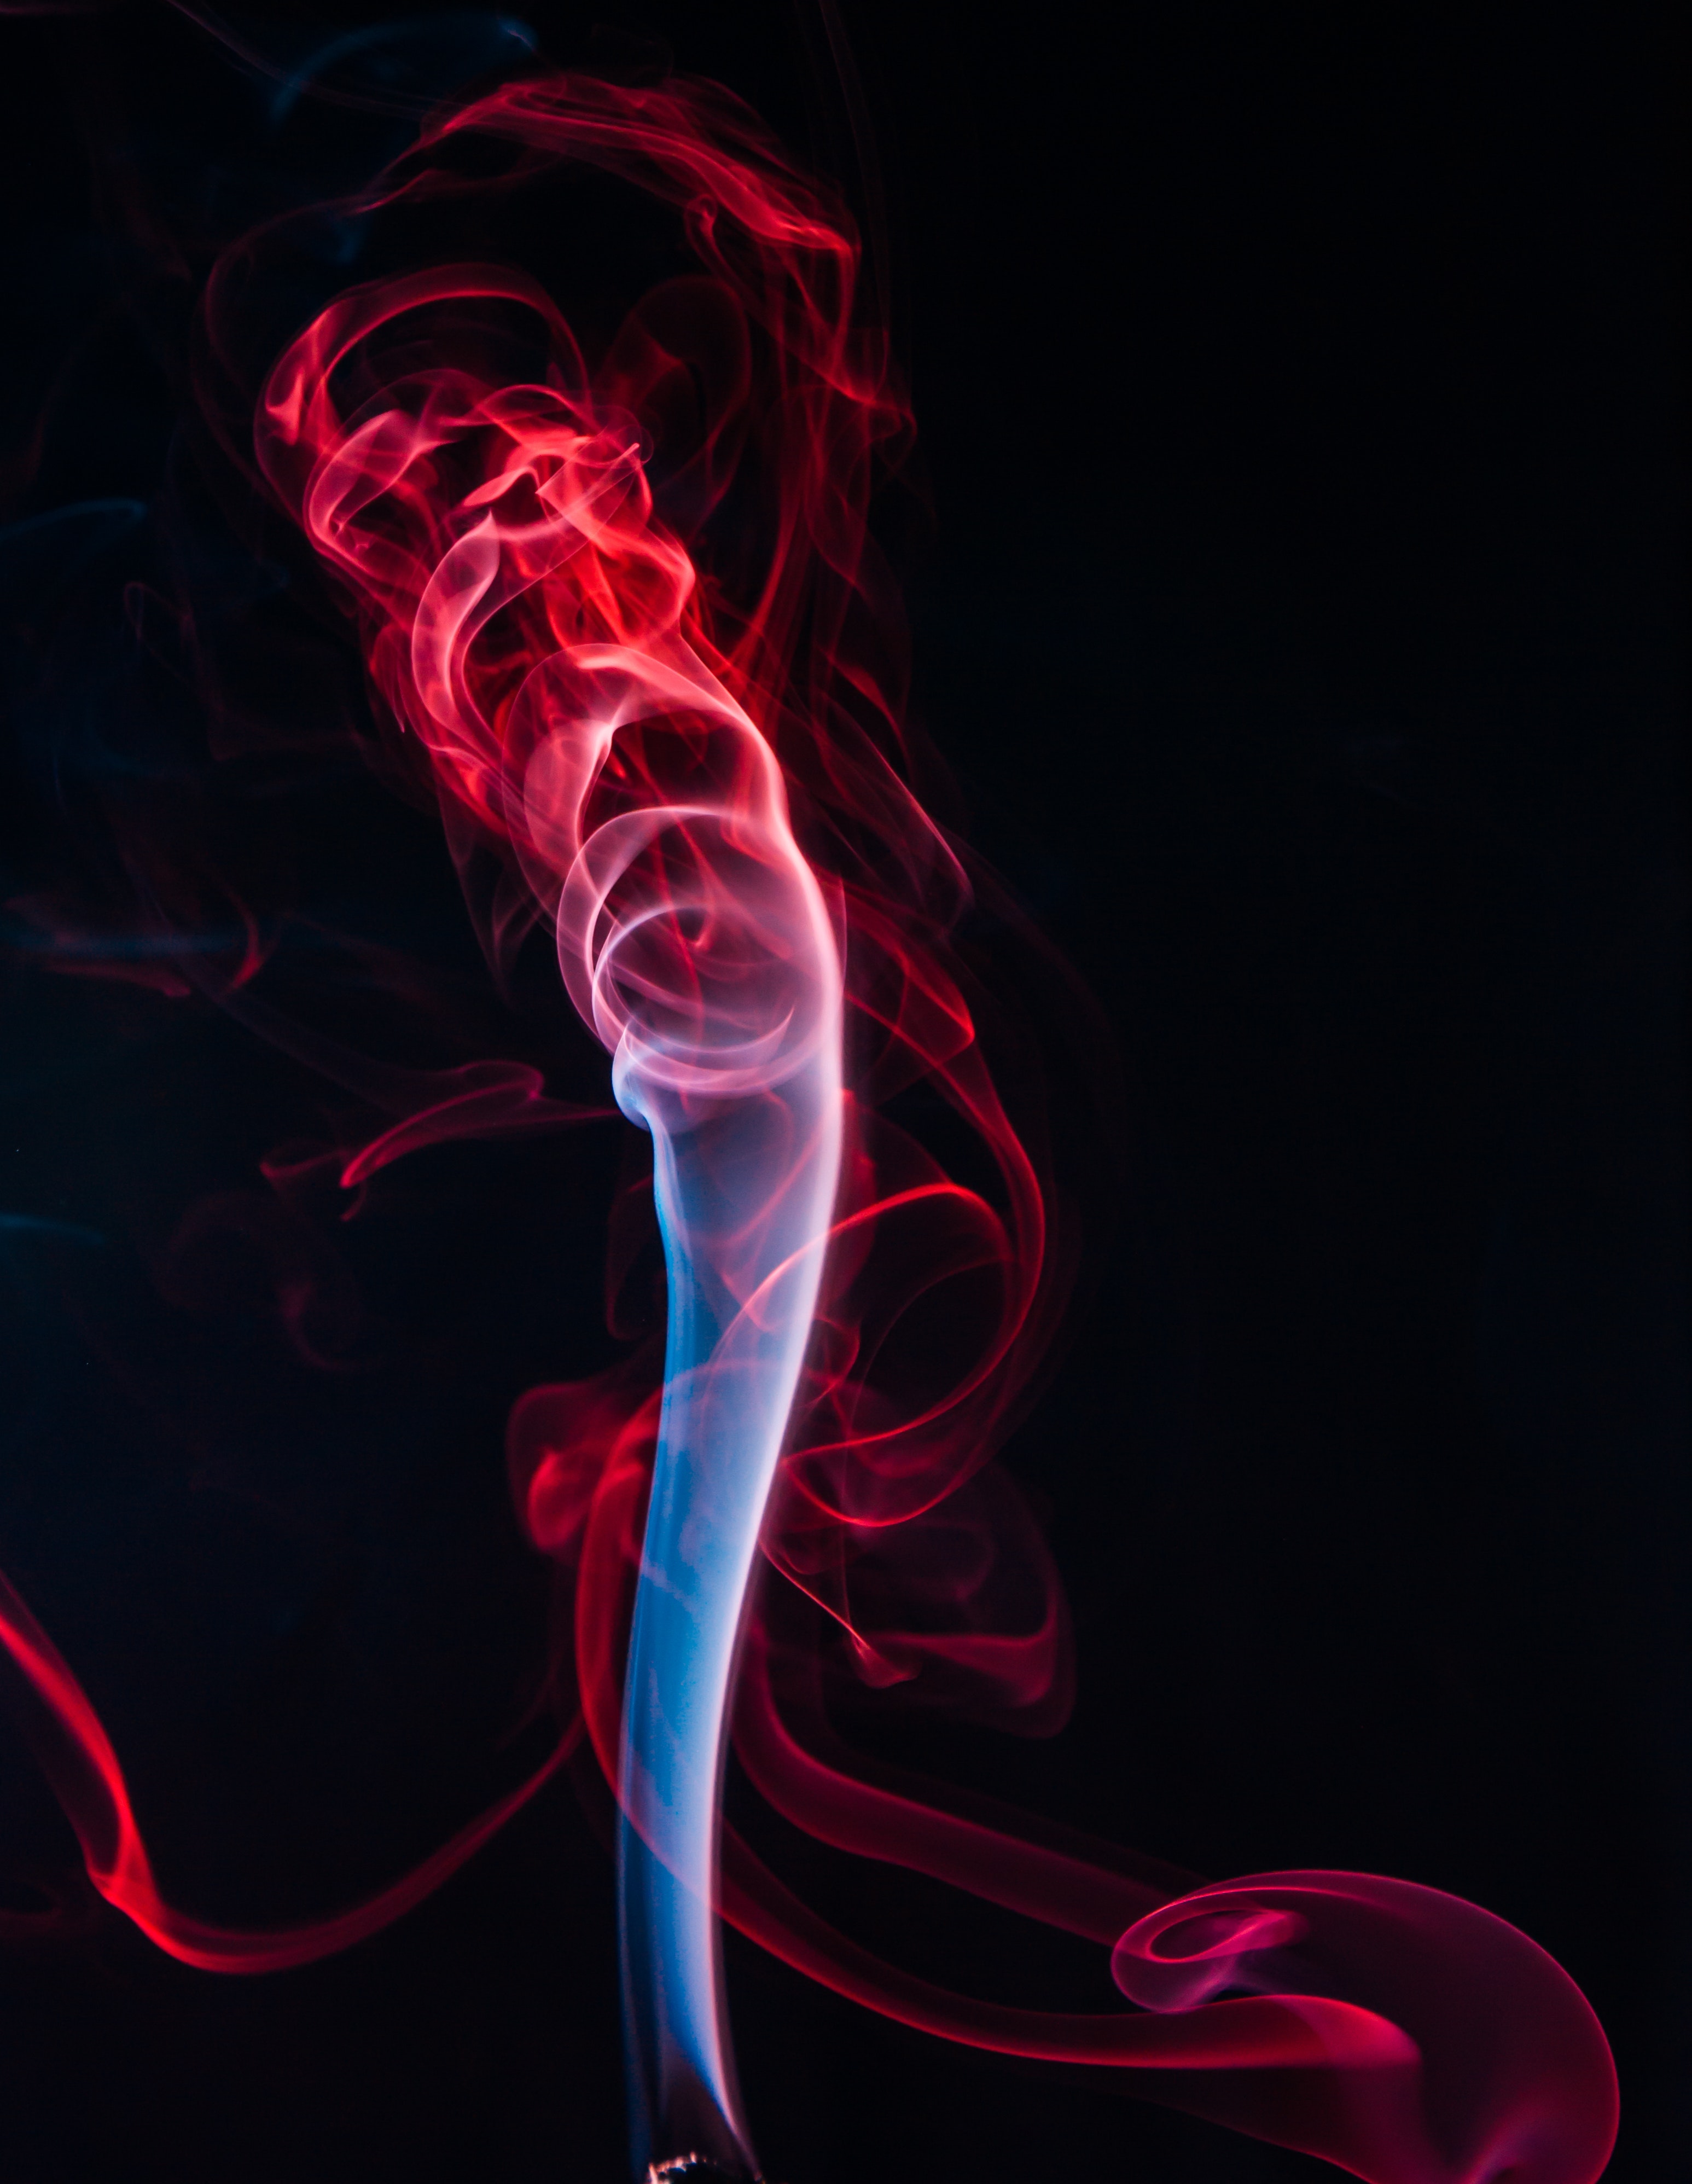 coloured smoke, black, colored smoke, clots, abstract, red, shroud